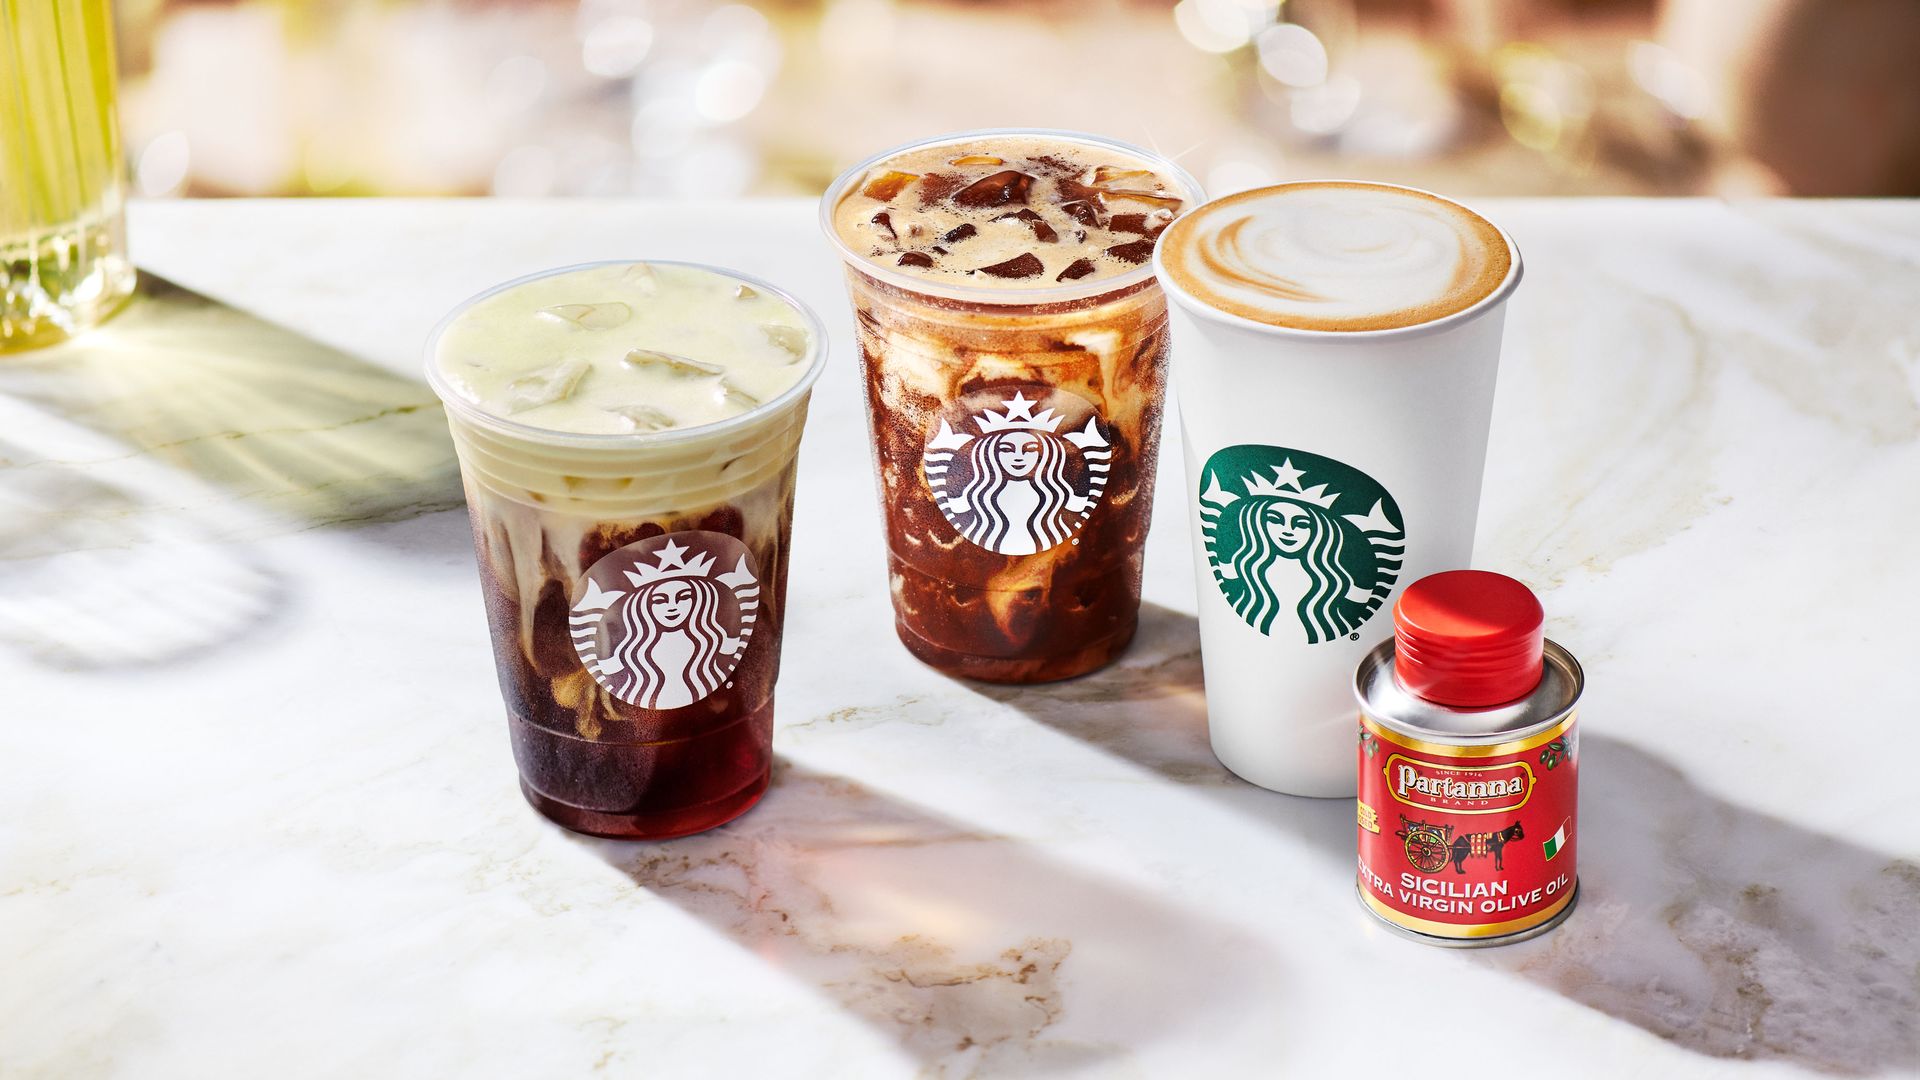 Starbucks cups with different drinks and a container of olive oil